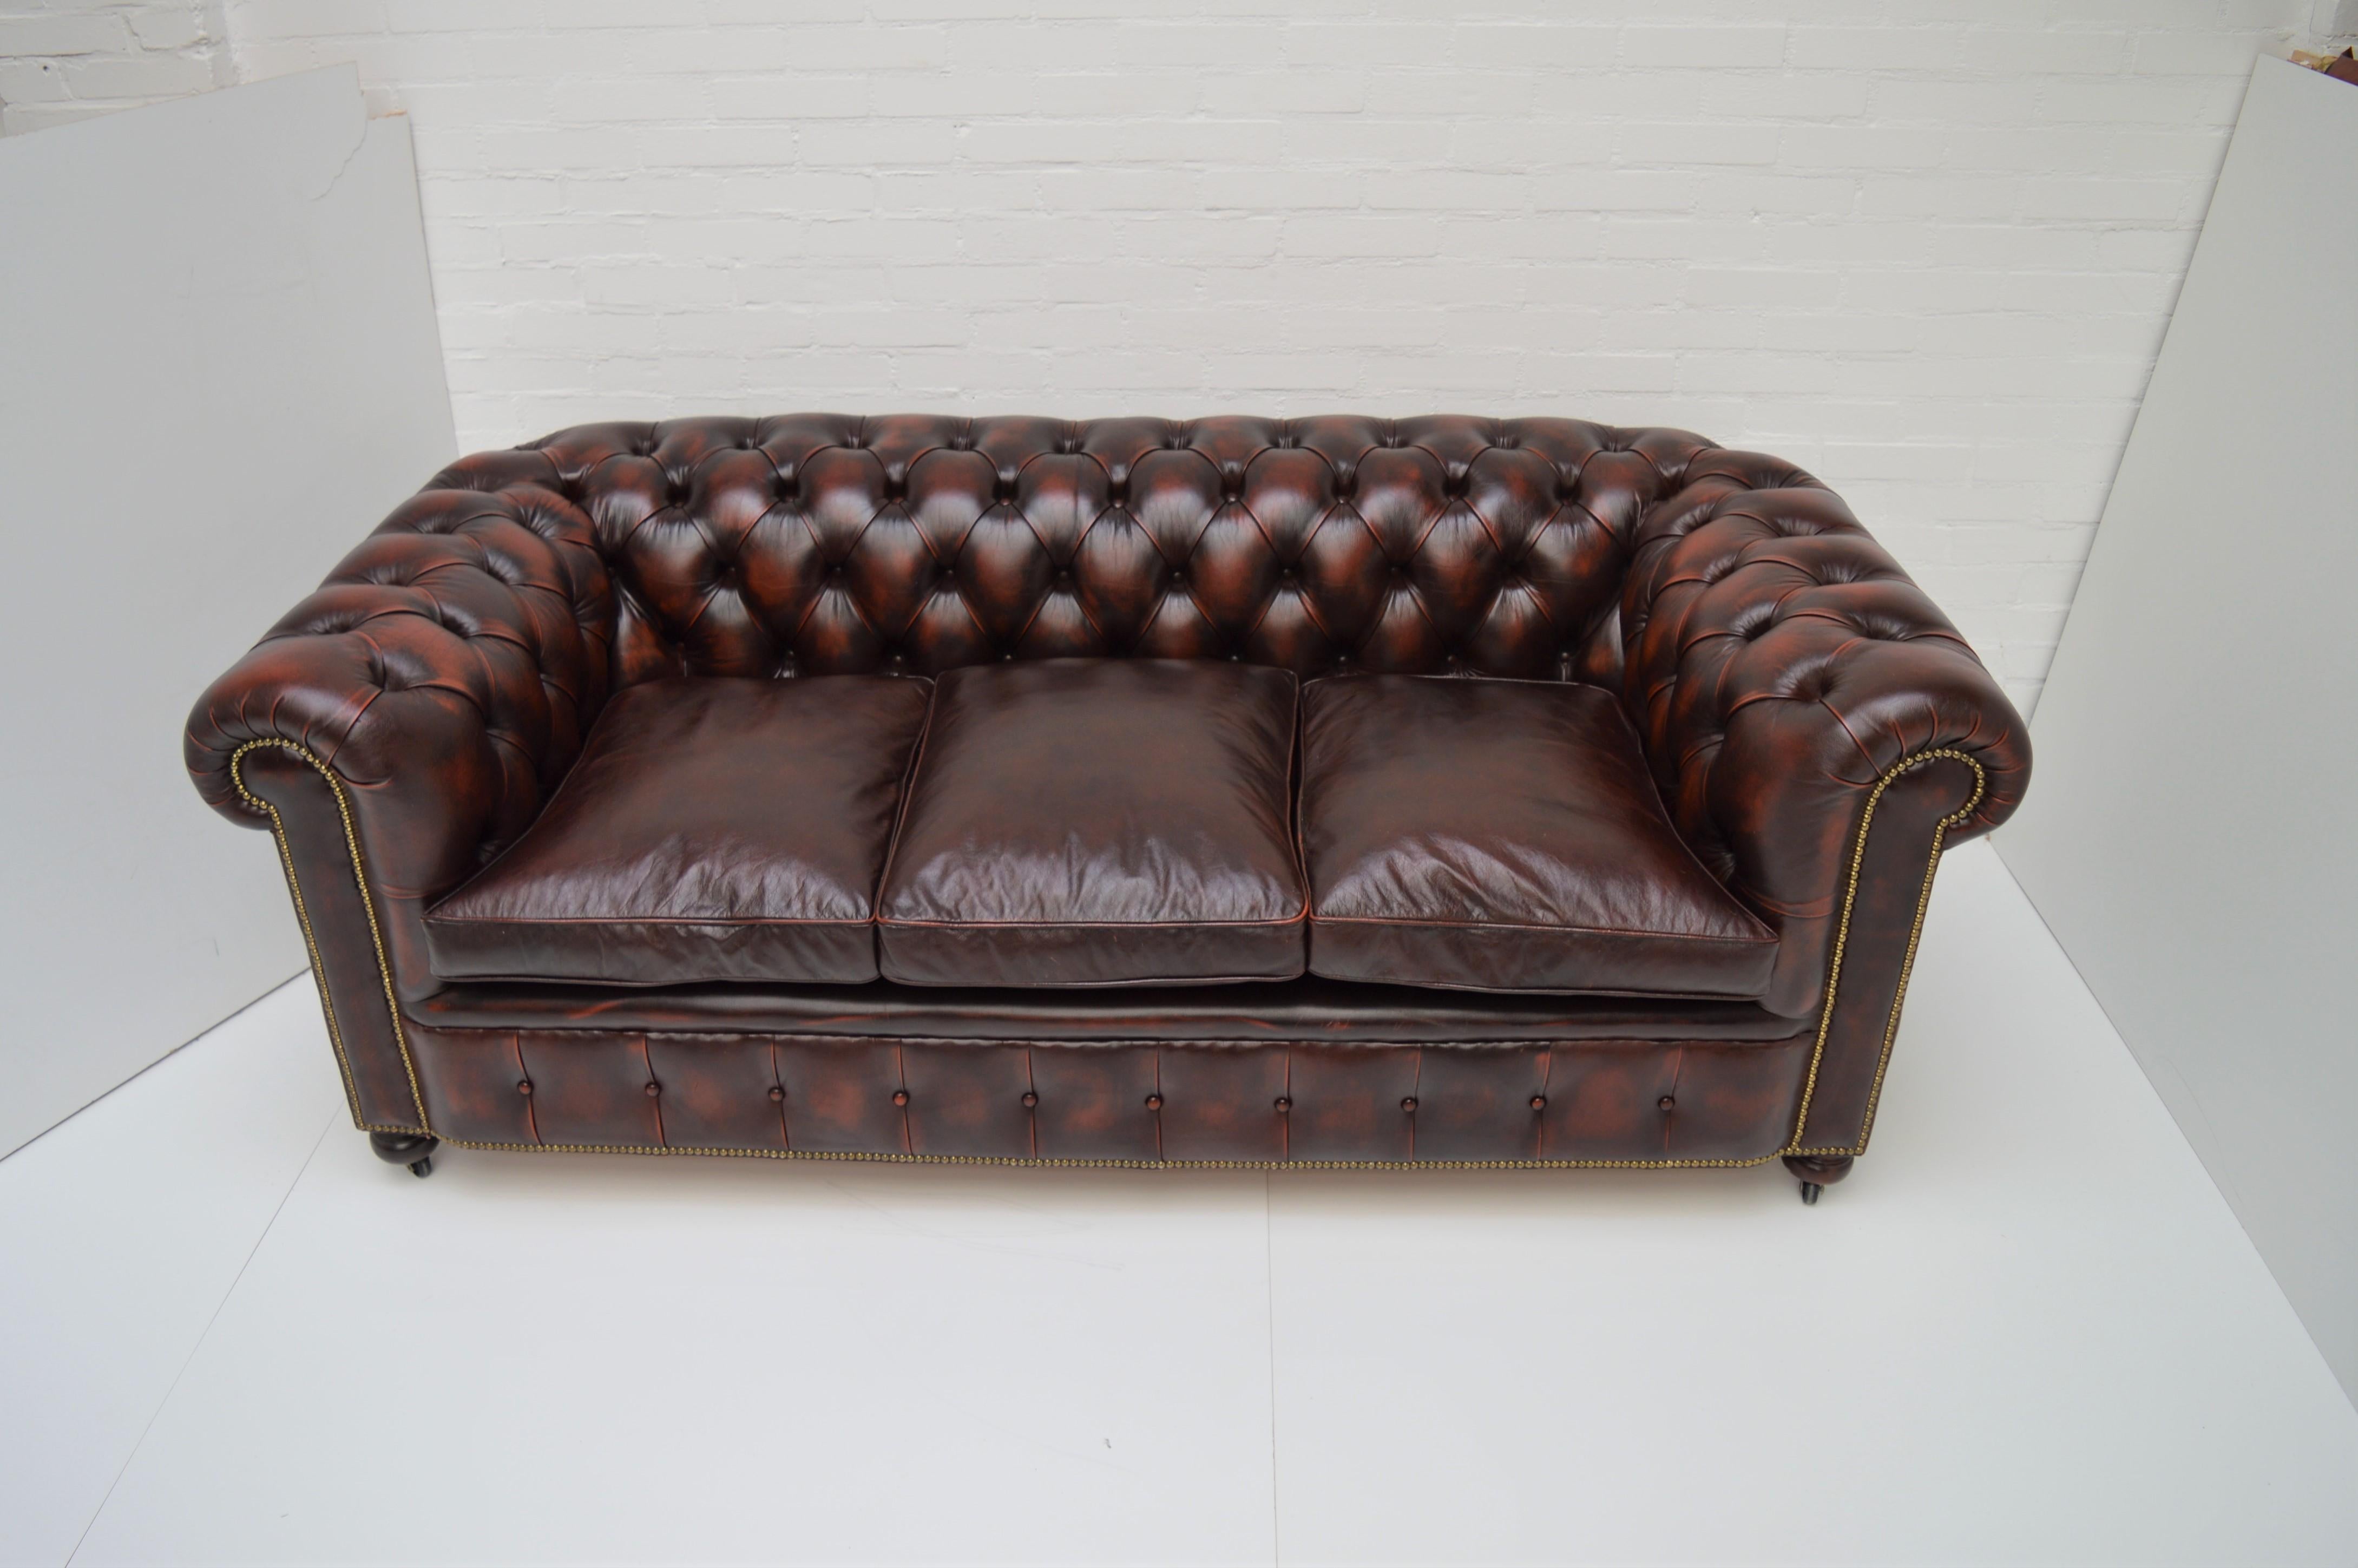 Late 19th Century Antique Tan Chesterfield Sofa with Brass Castors / Wheels For Sale